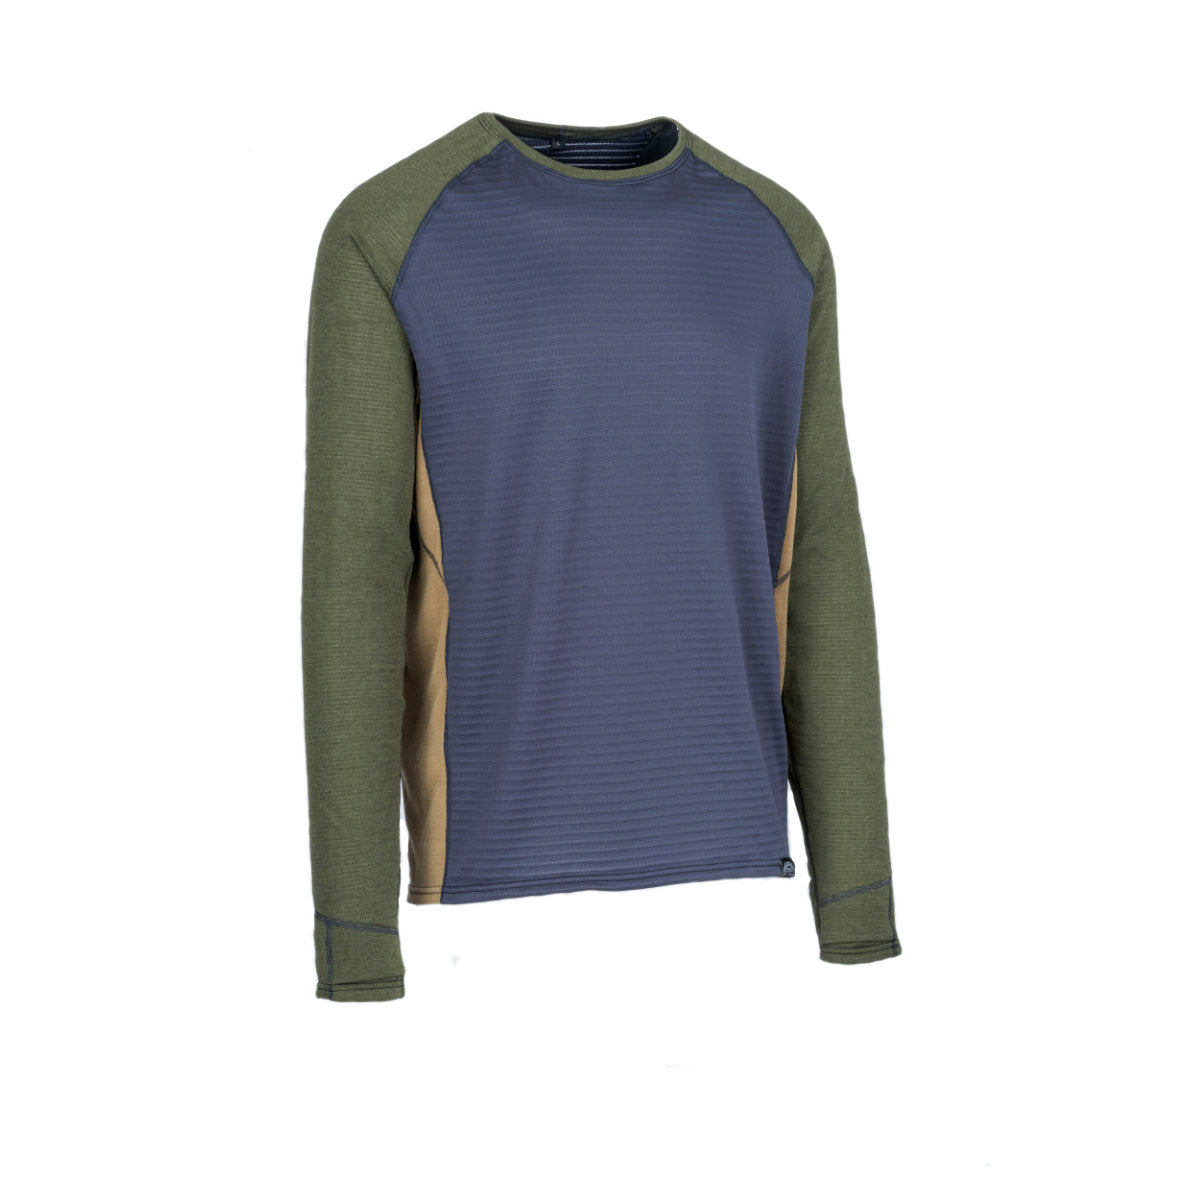 Crewneck – Baseline Immersion Research | Immersion Polartec® Research Shirt